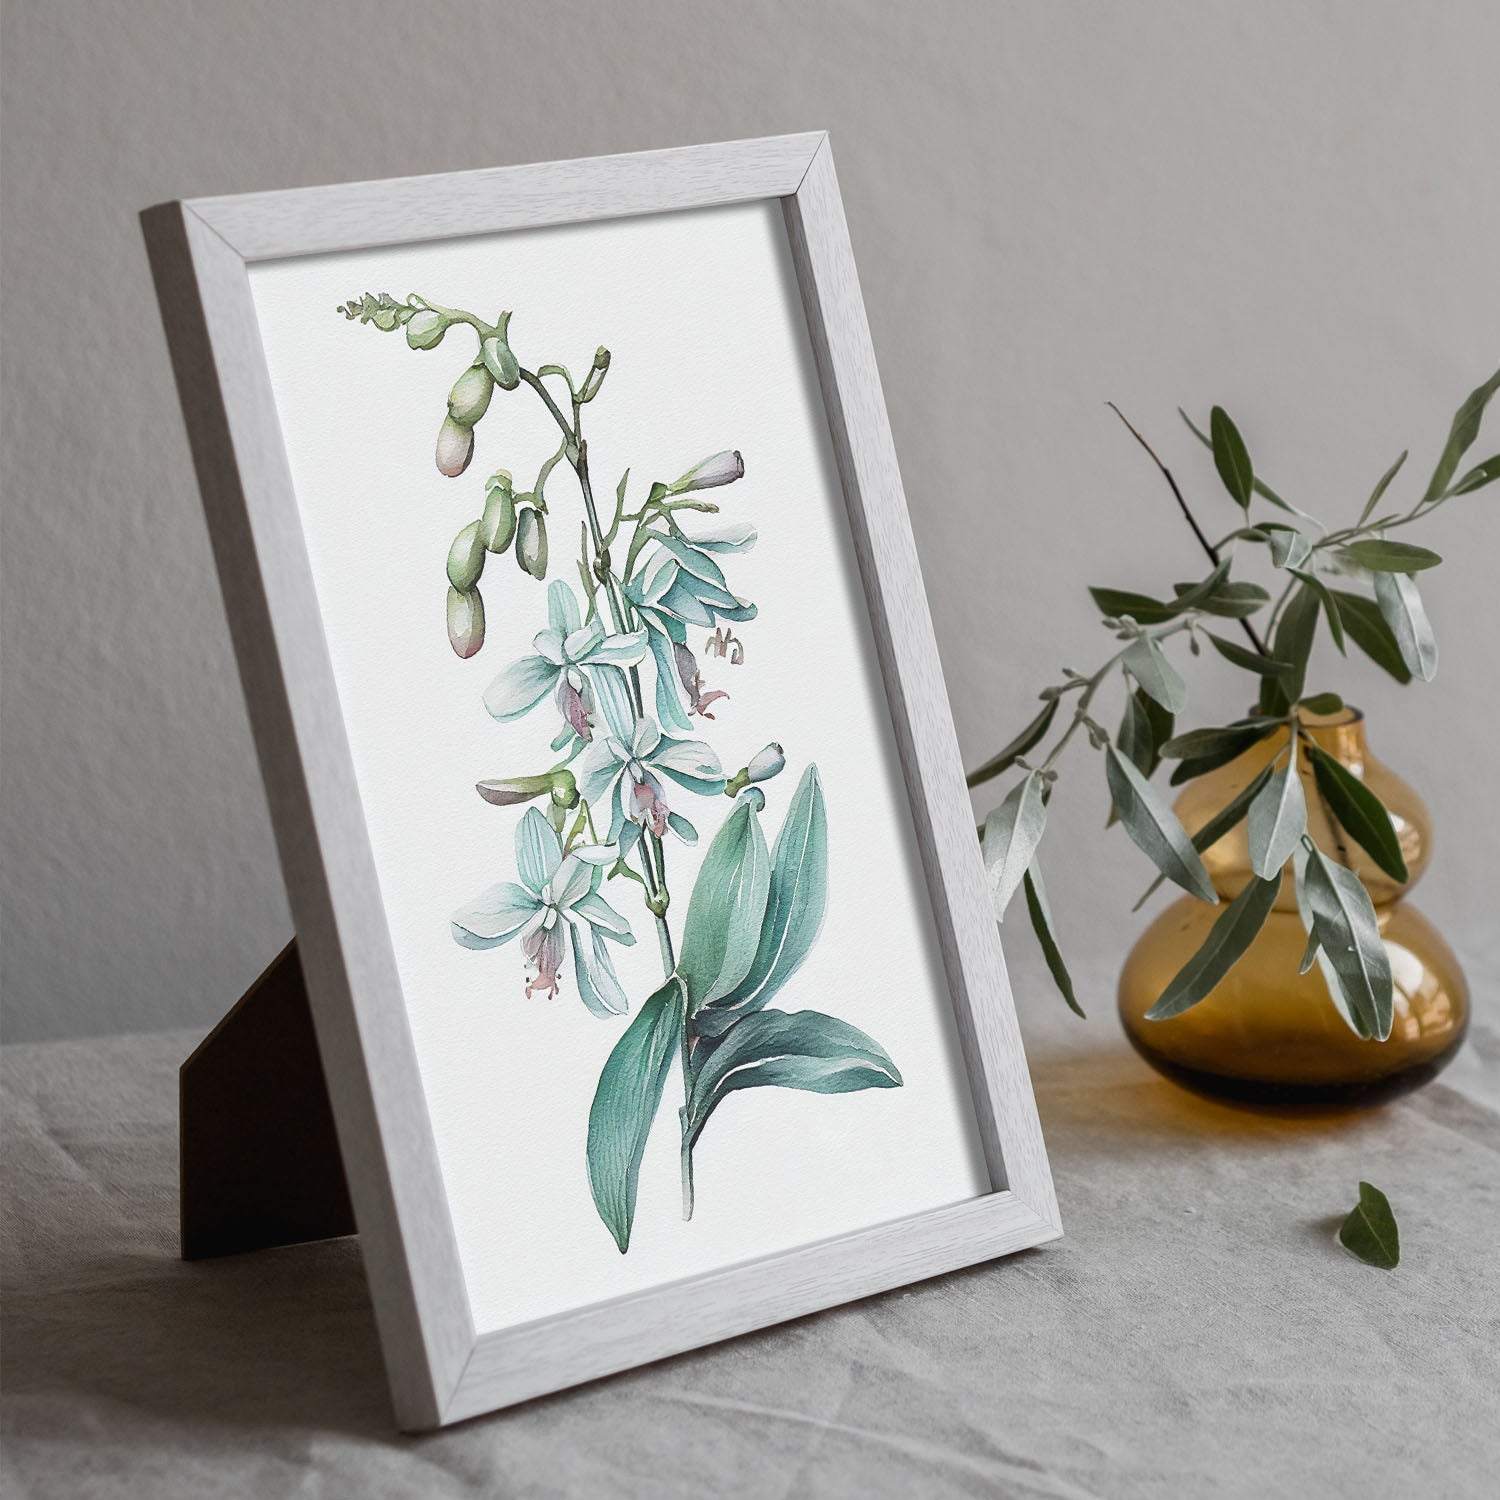 Nacnic watercolor minmal Orchid_2. Aesthetic Wall Art Prints for Bedroom or Living Room Design.-Artwork-Nacnic-A4-Sin Marco-Nacnic Estudio SL